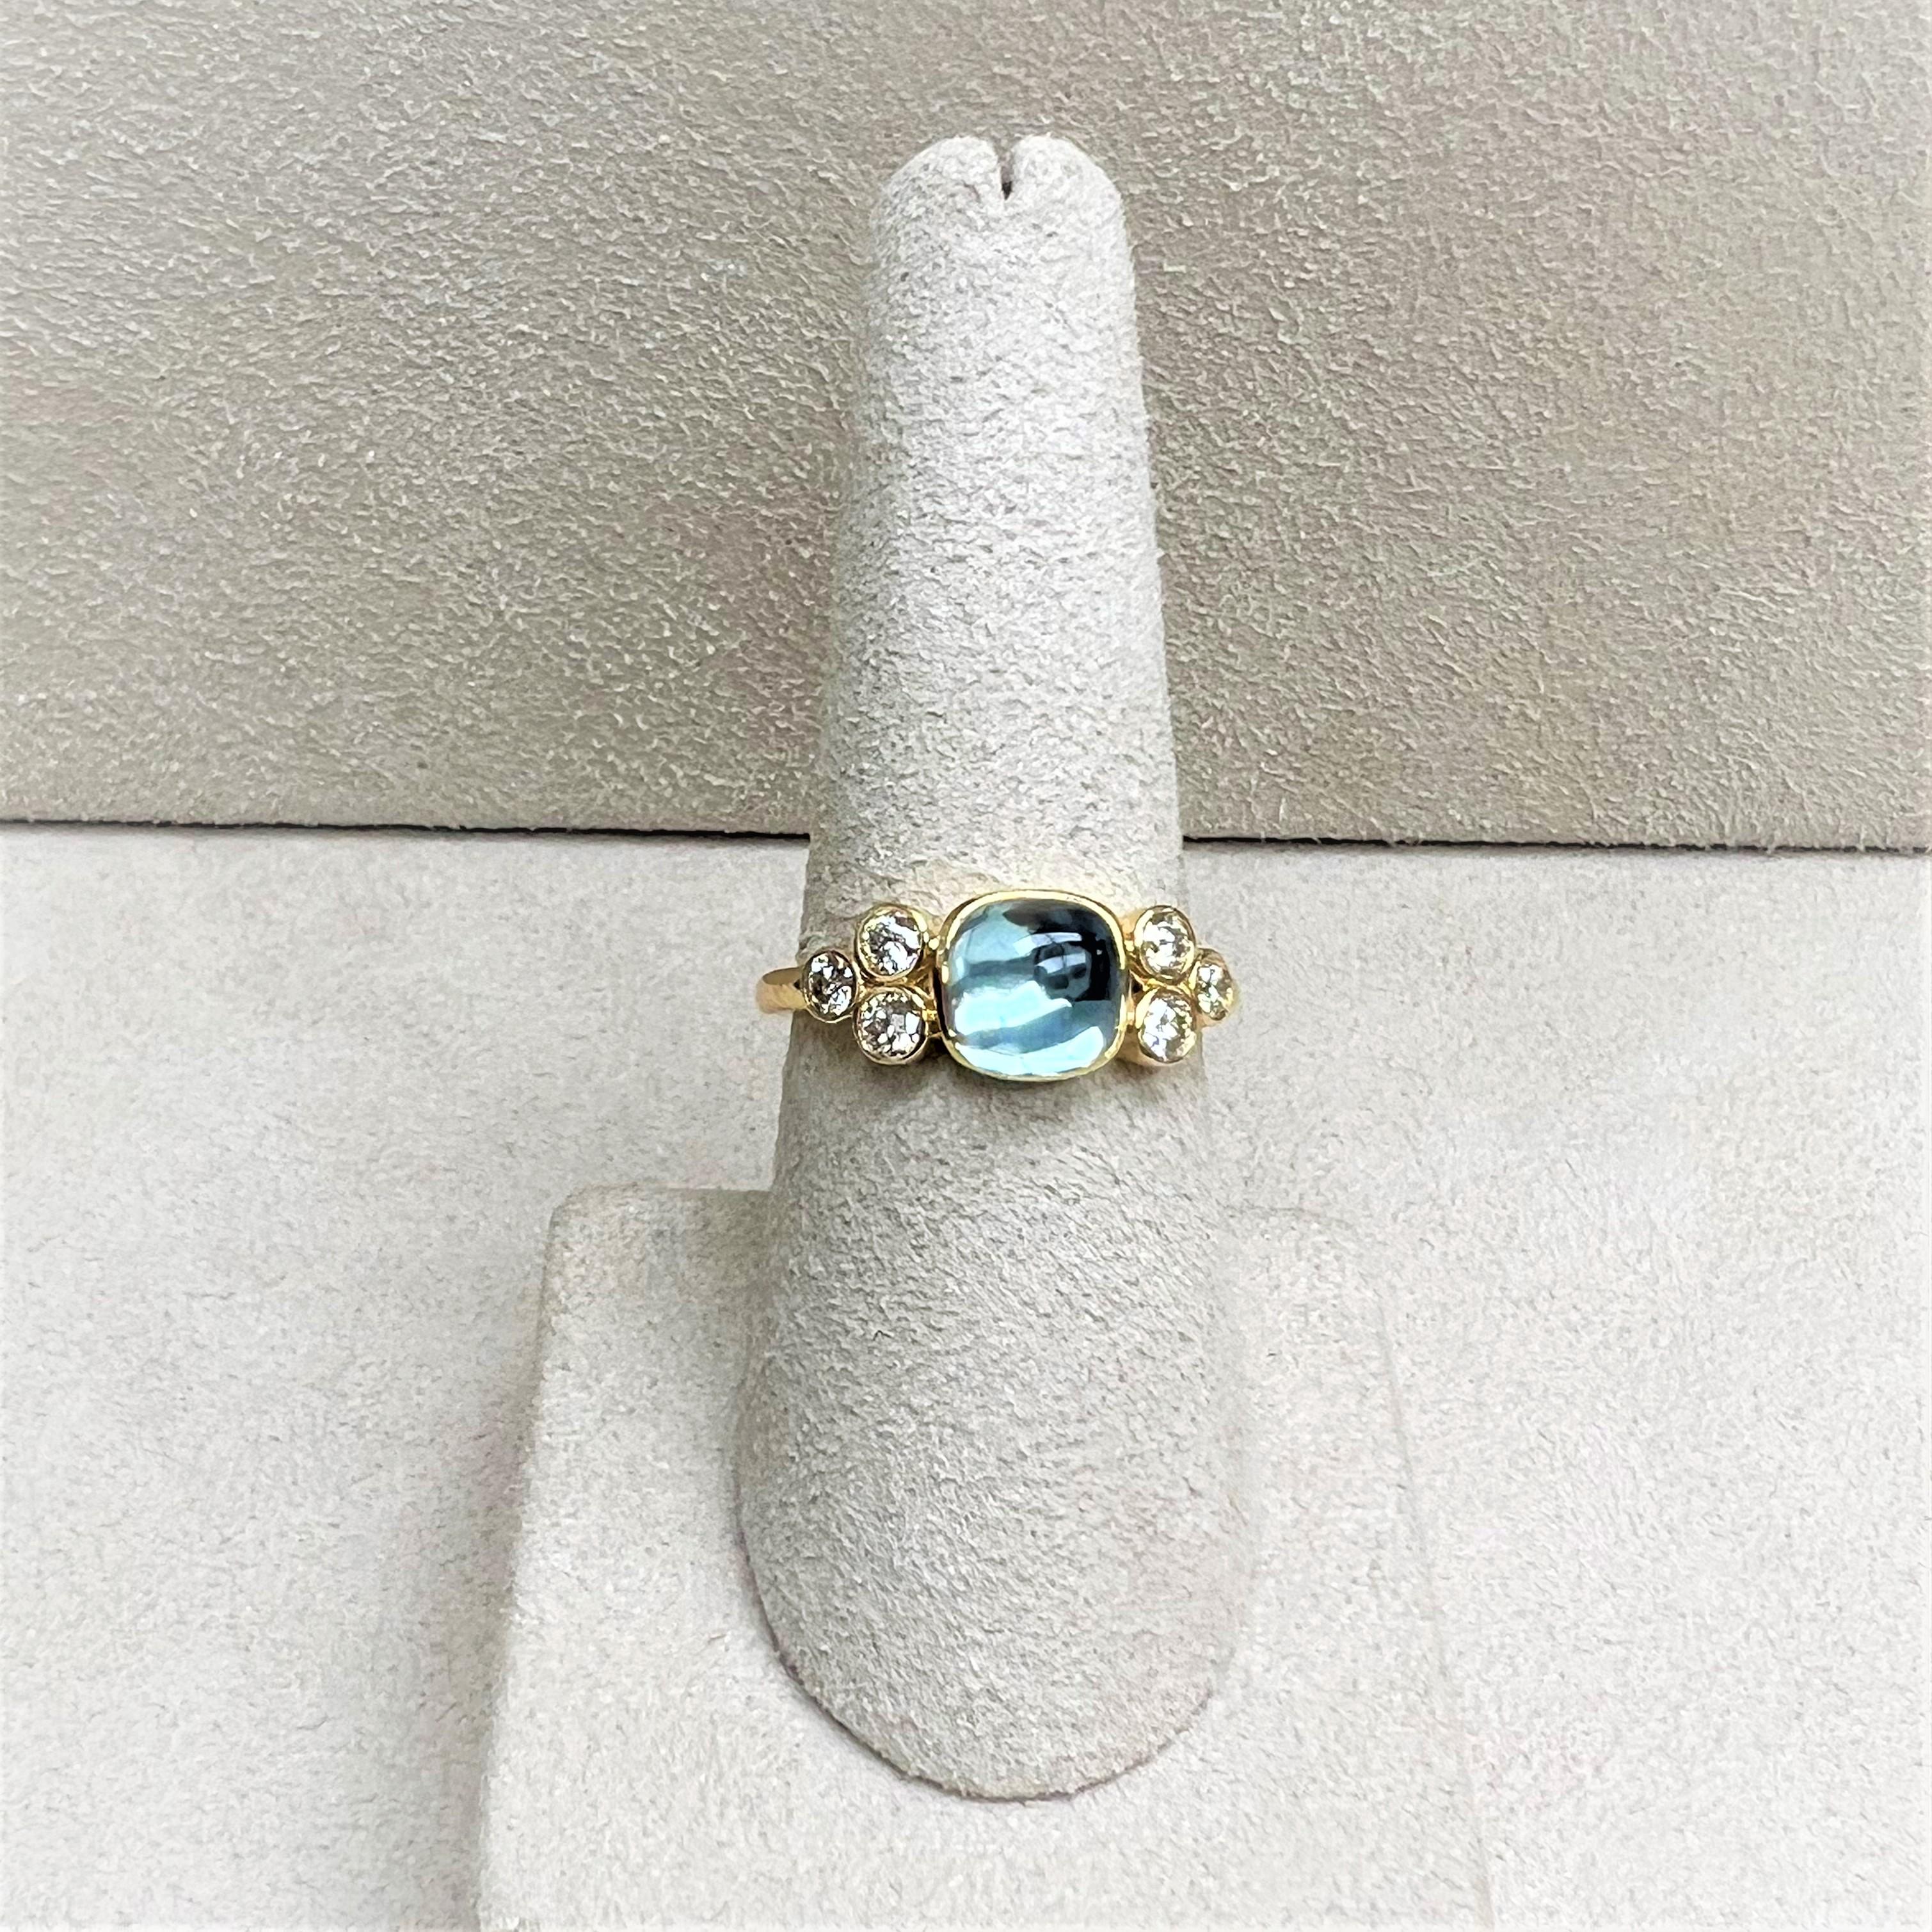 Created in 18 karat yellow gold
Blue topaz 2.50 carats approx.
Champagne diamonds 0.30 carat approx.
Ring size US 6.5, Can be made in other ring sizes on special order